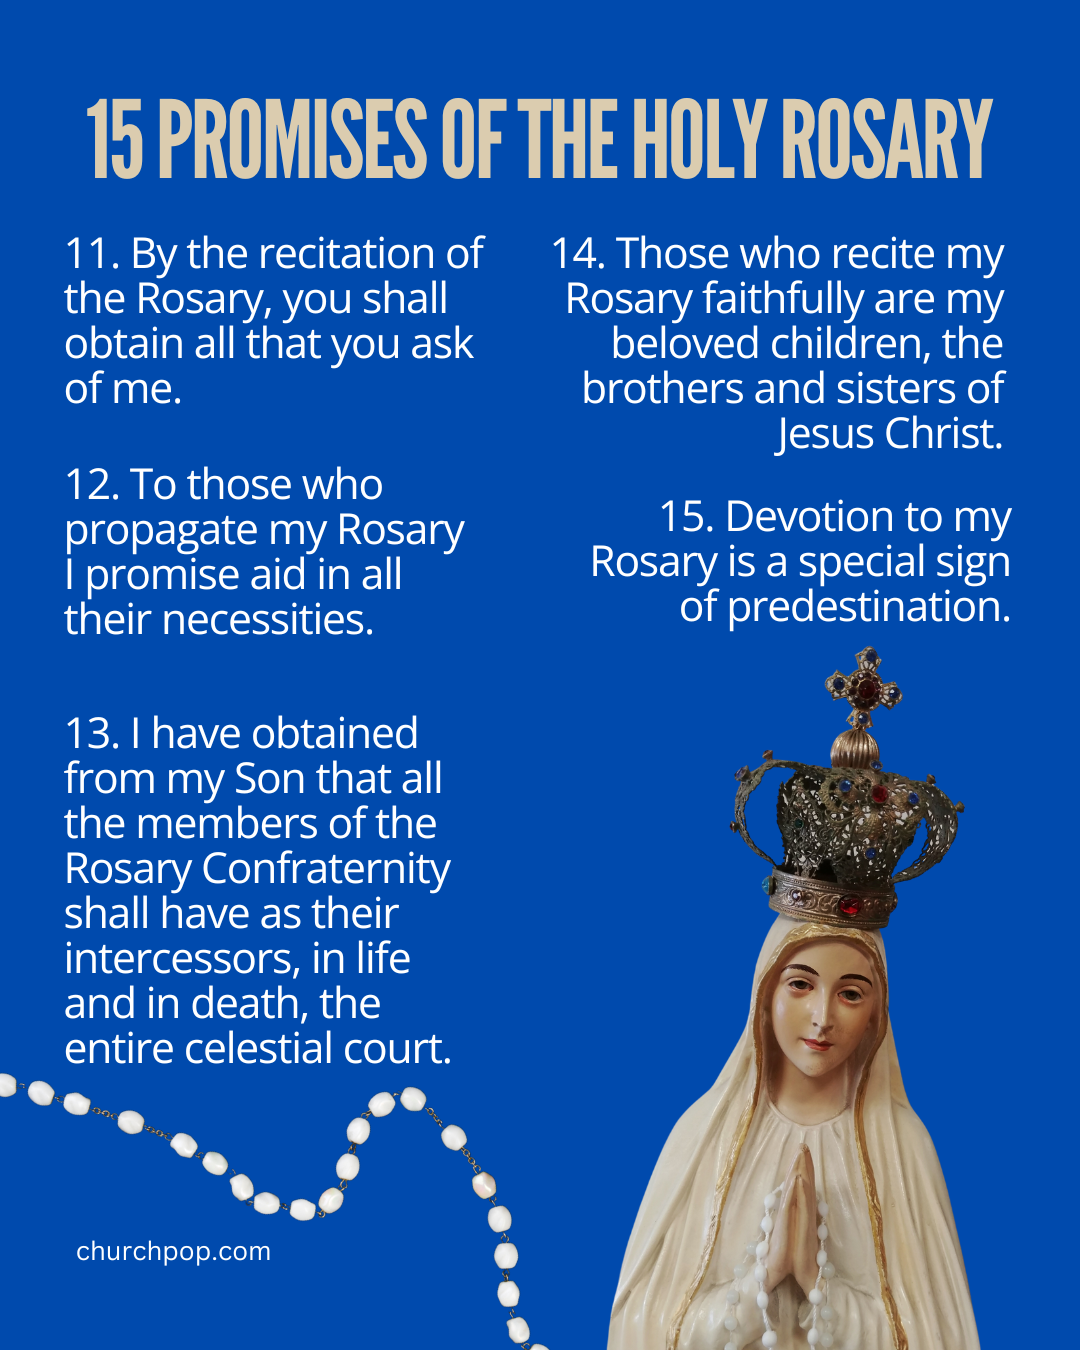 rosary prayers, rosary promises, promises of the rosary